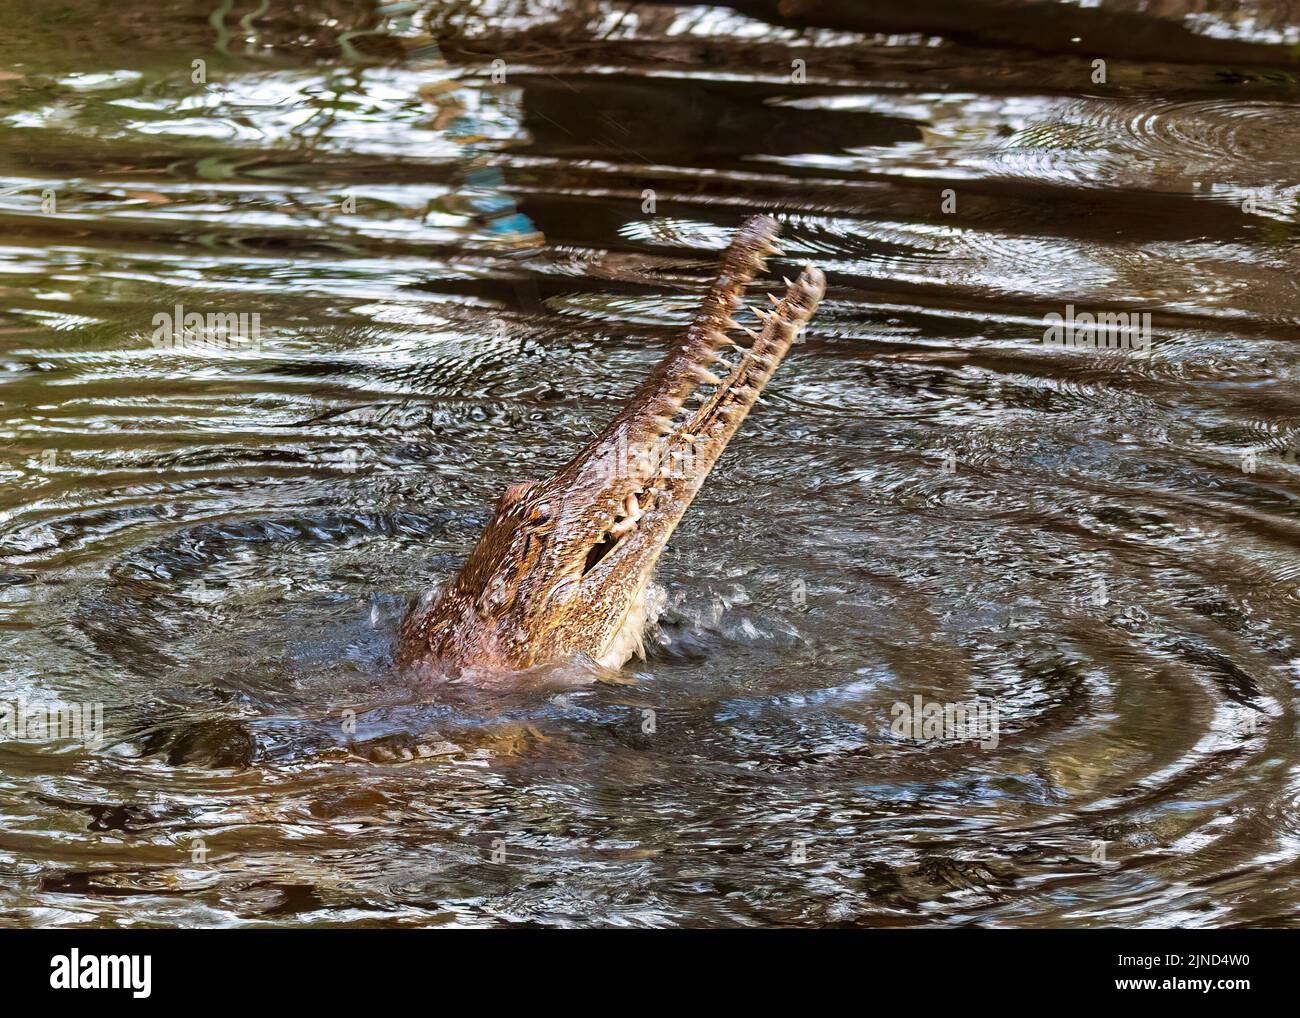 Headshot of a Freshwater Crocodile (Crocodylus johnstoni) with mouth open and showing teeth in a river, Northern Territory, NT, Australia Stock Photo